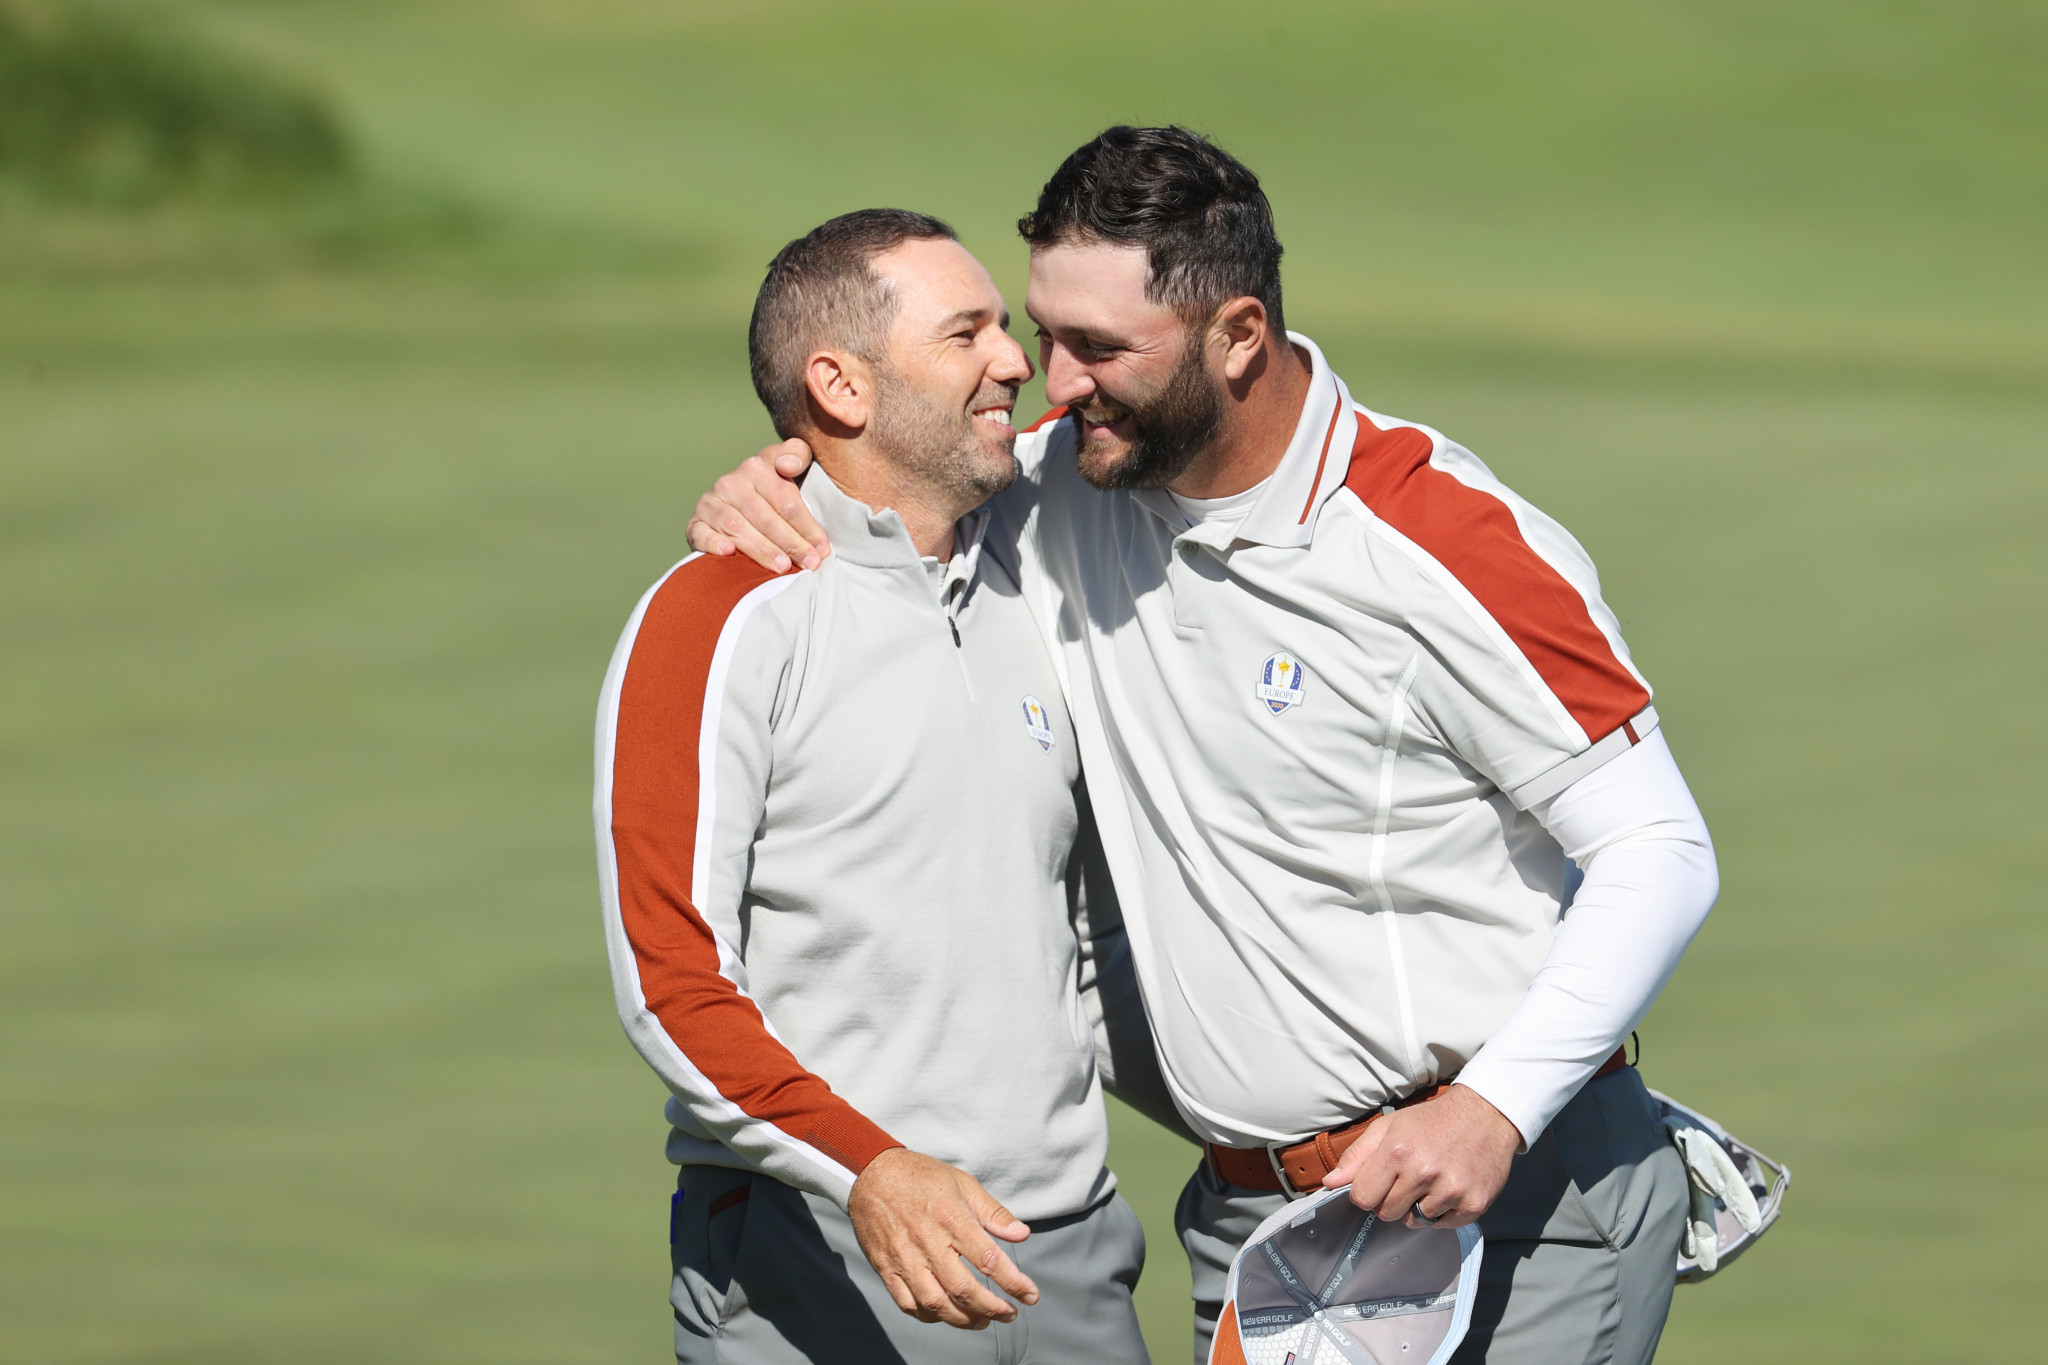 Spanish pair Jon Rahm and Sergio Garcia have won all three matches played as a pair at this year's Ryder Cup ©Getty Images